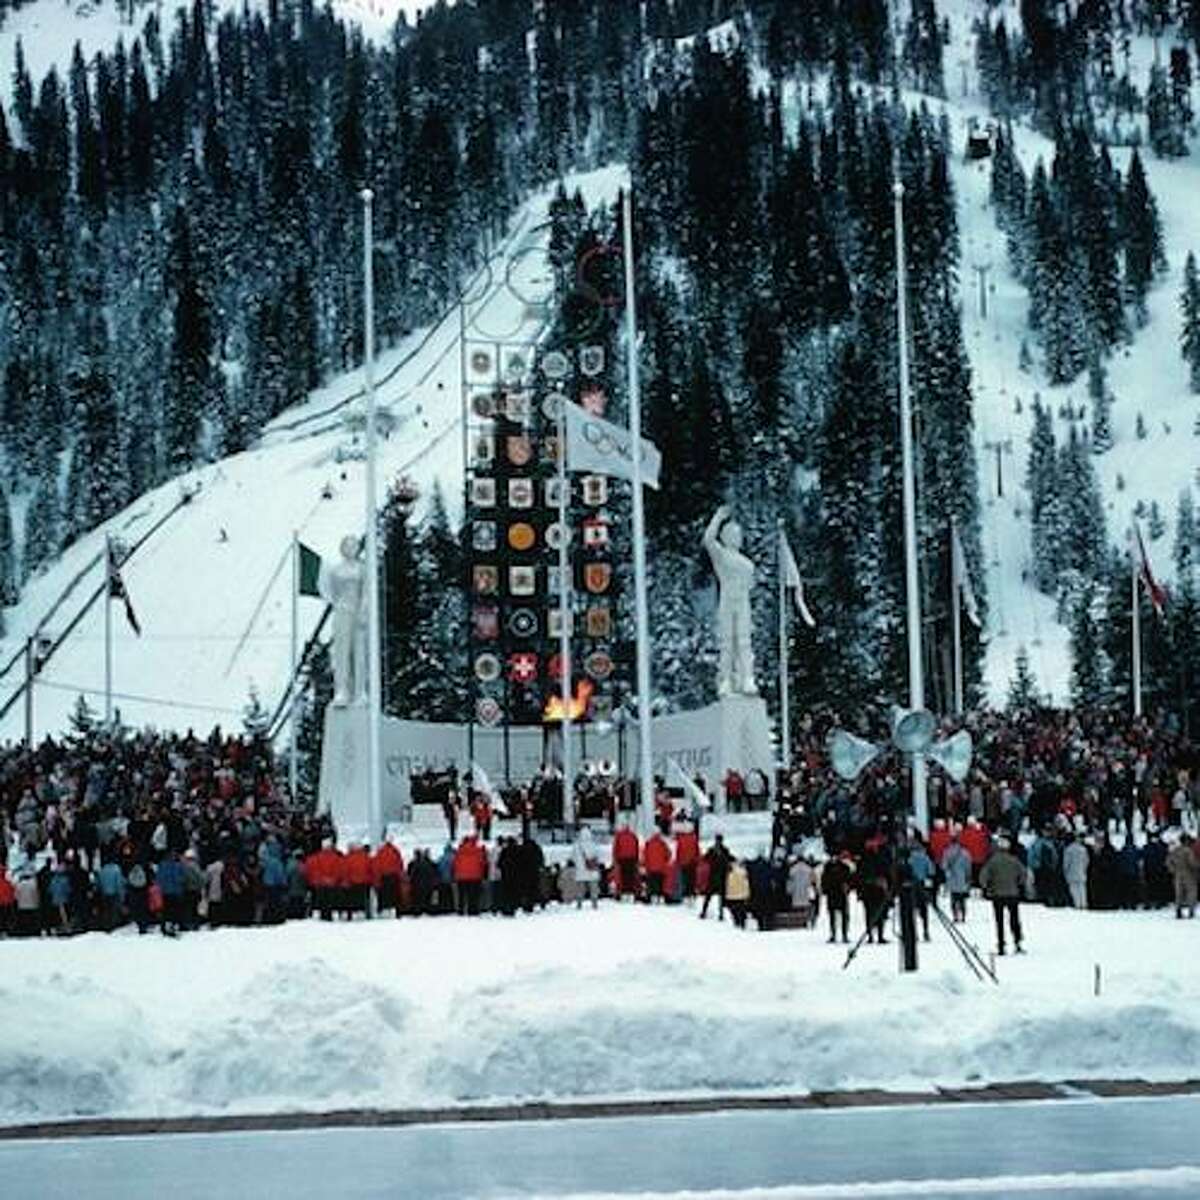 A scene from the documentary “Magic in the Mountains” about the ski resort formerly called Squaw Valley hosting the 1960 Winter Olympics.